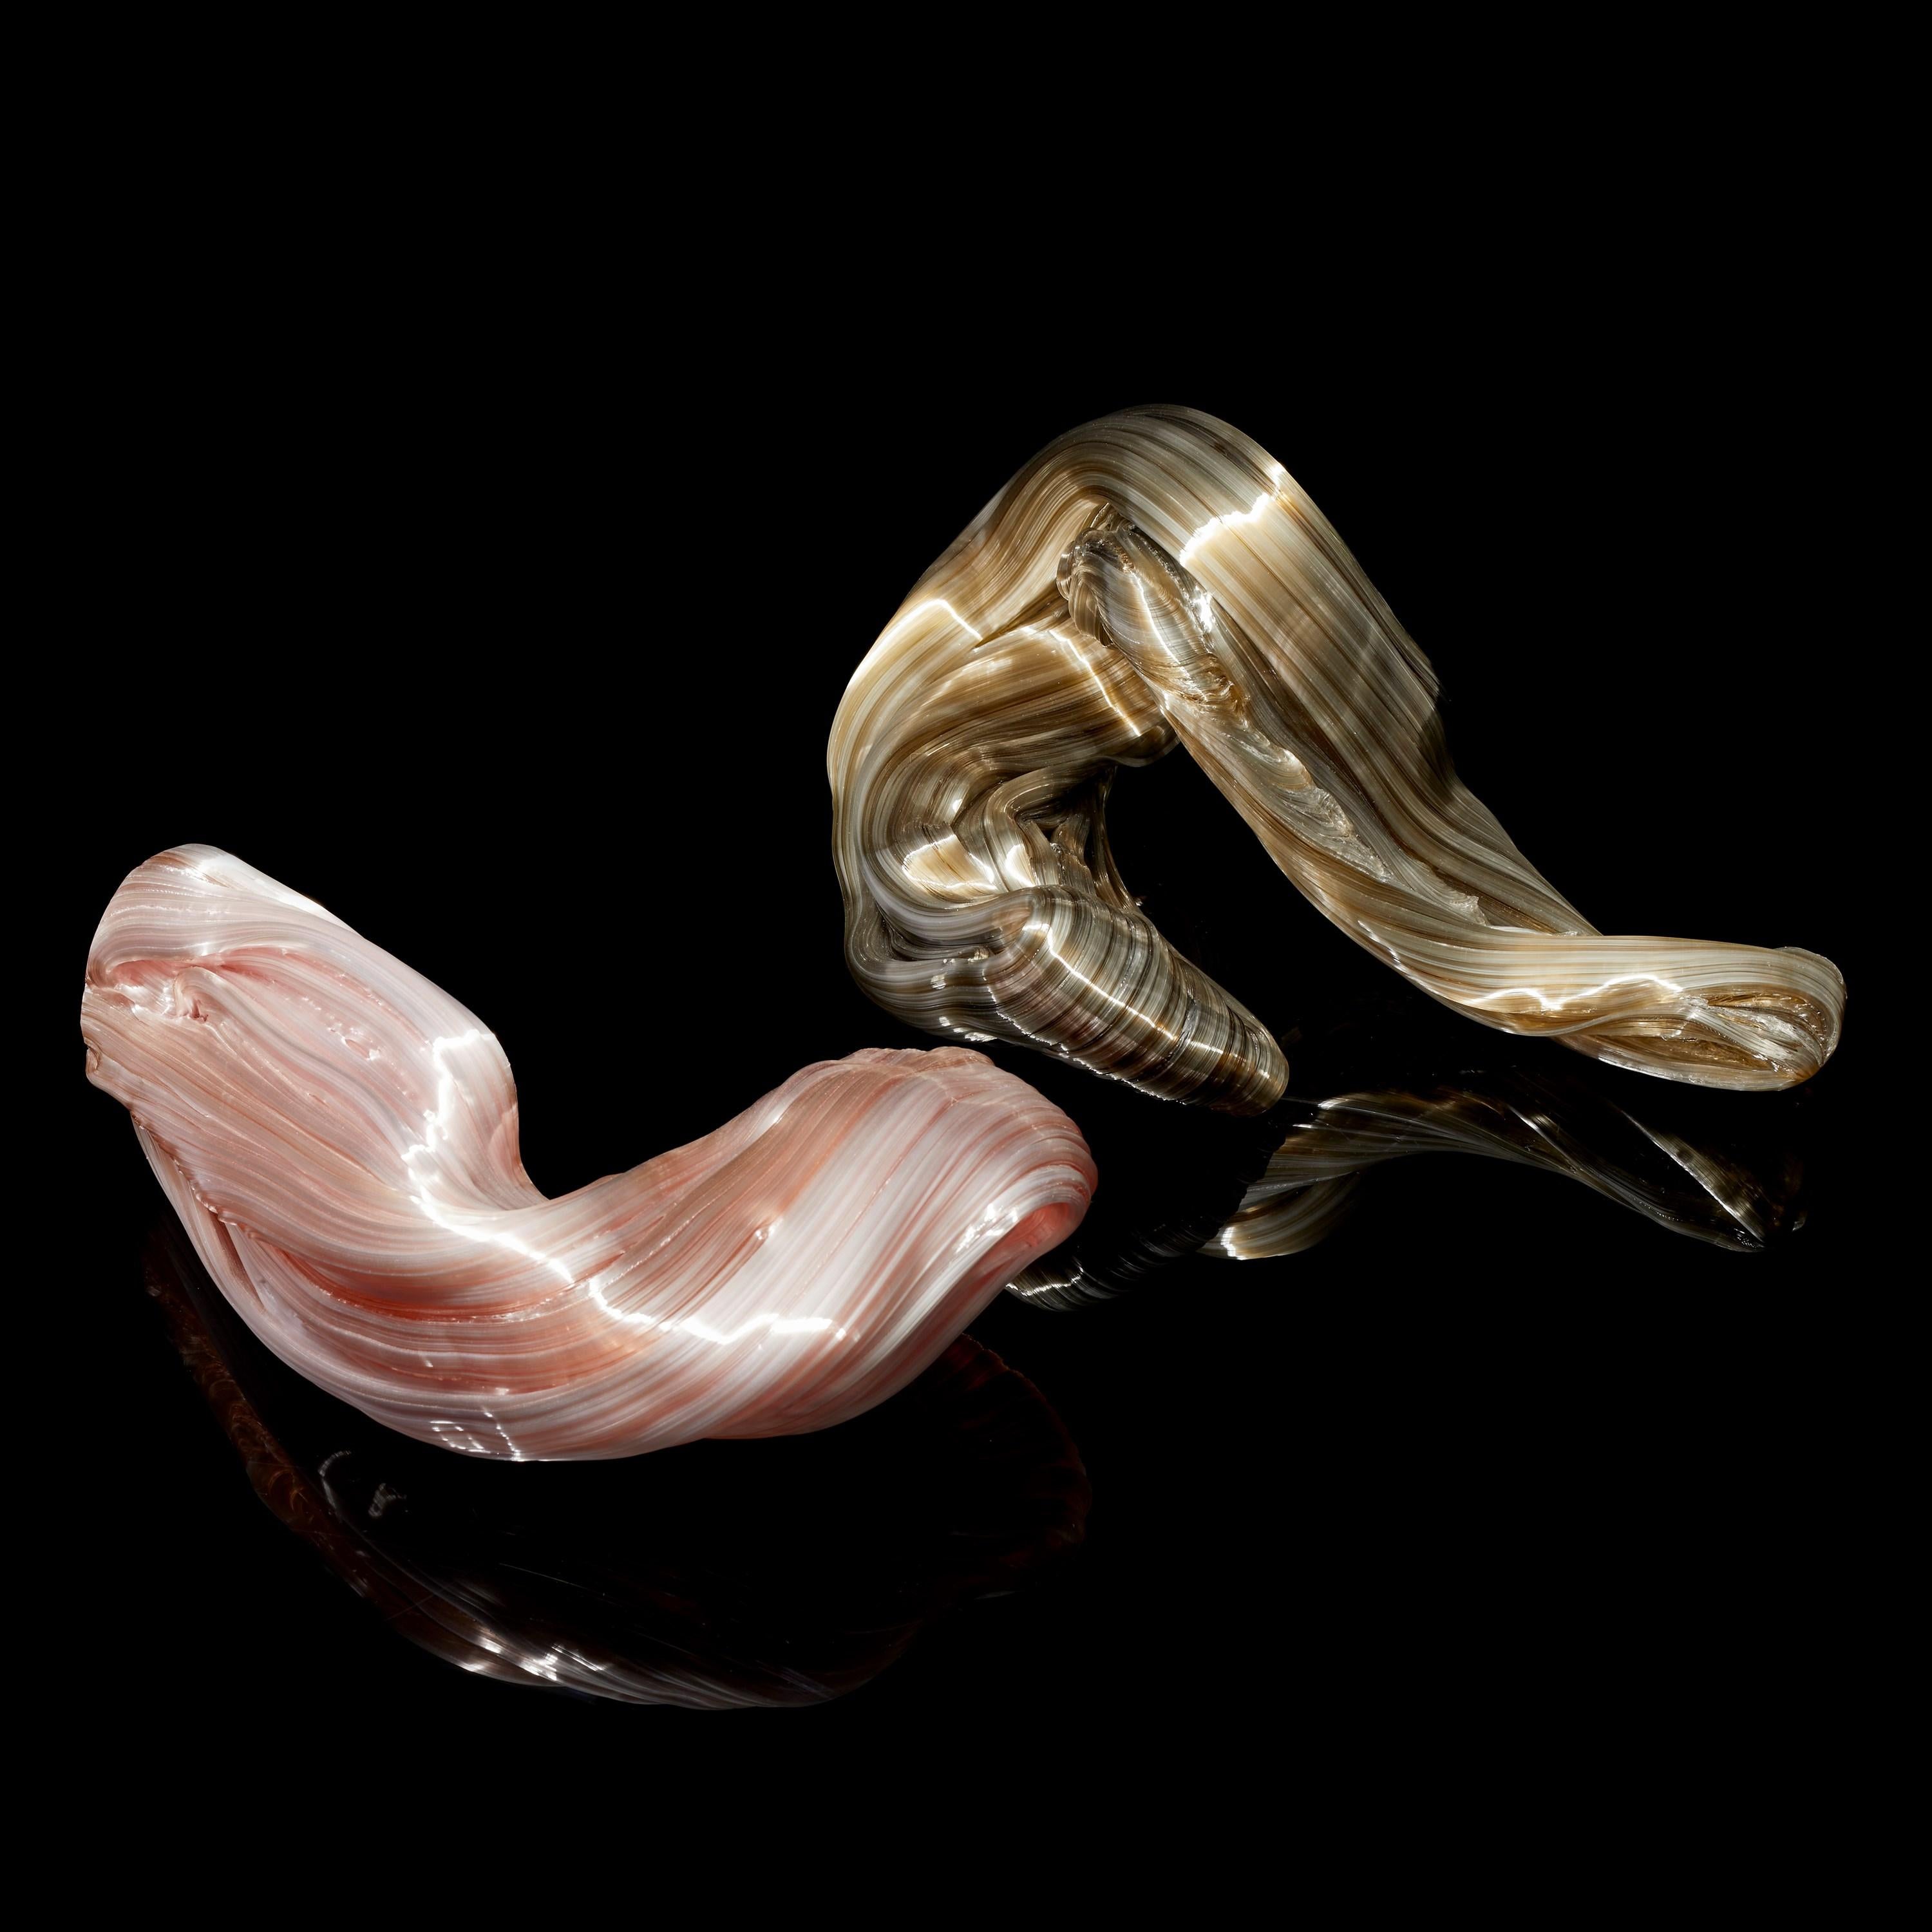 Art Glass Curve in Coral, a Unique coral pink Glass Sculpture by Maria Bang Espersen